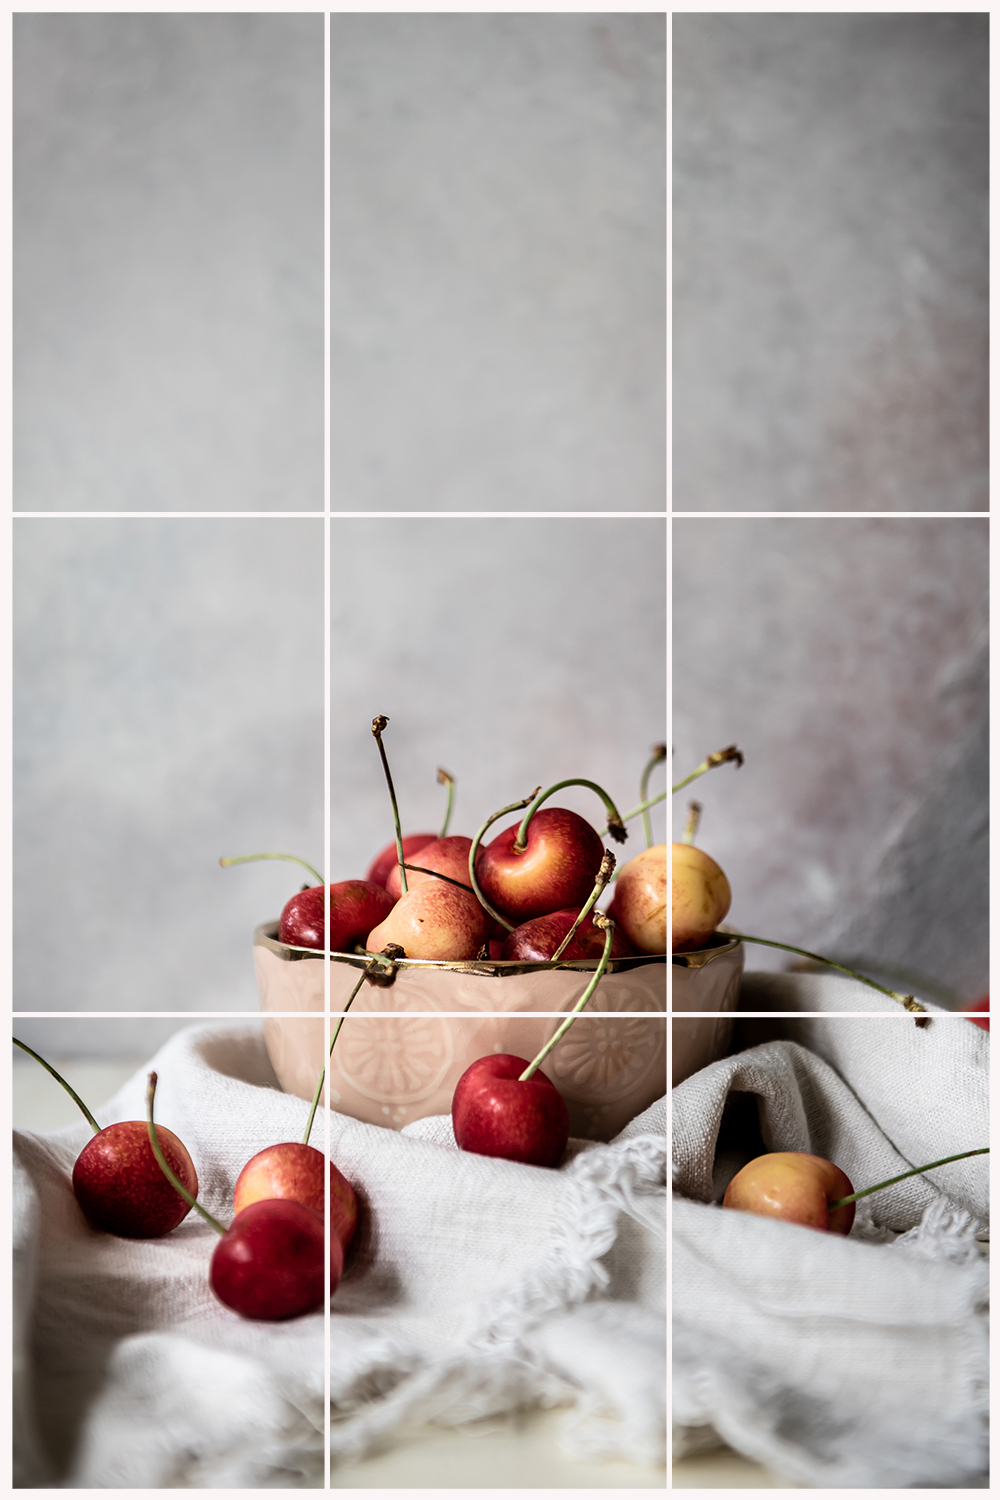 rule of thirds grid example